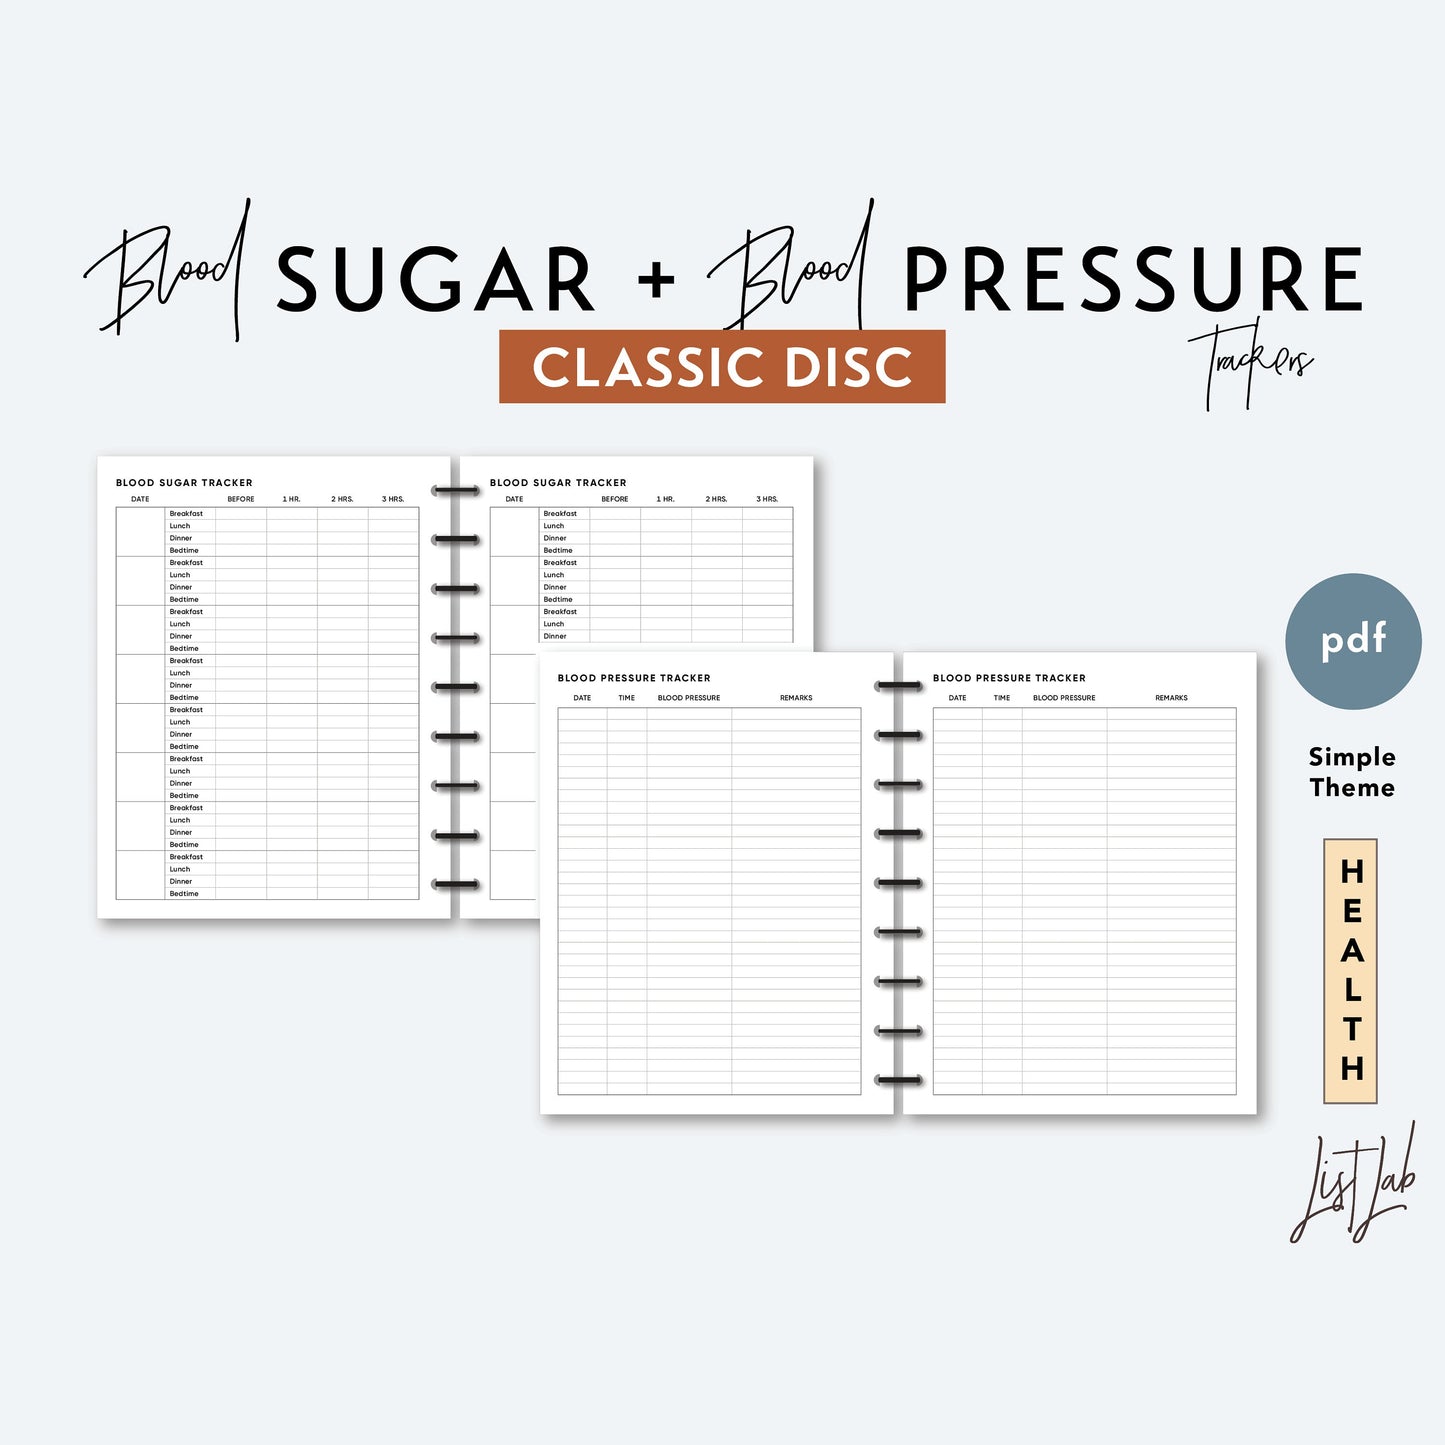 Classic Discbound BLOOD SUGAR and Blood PRESSURE TRACKERS Printable Insert Set